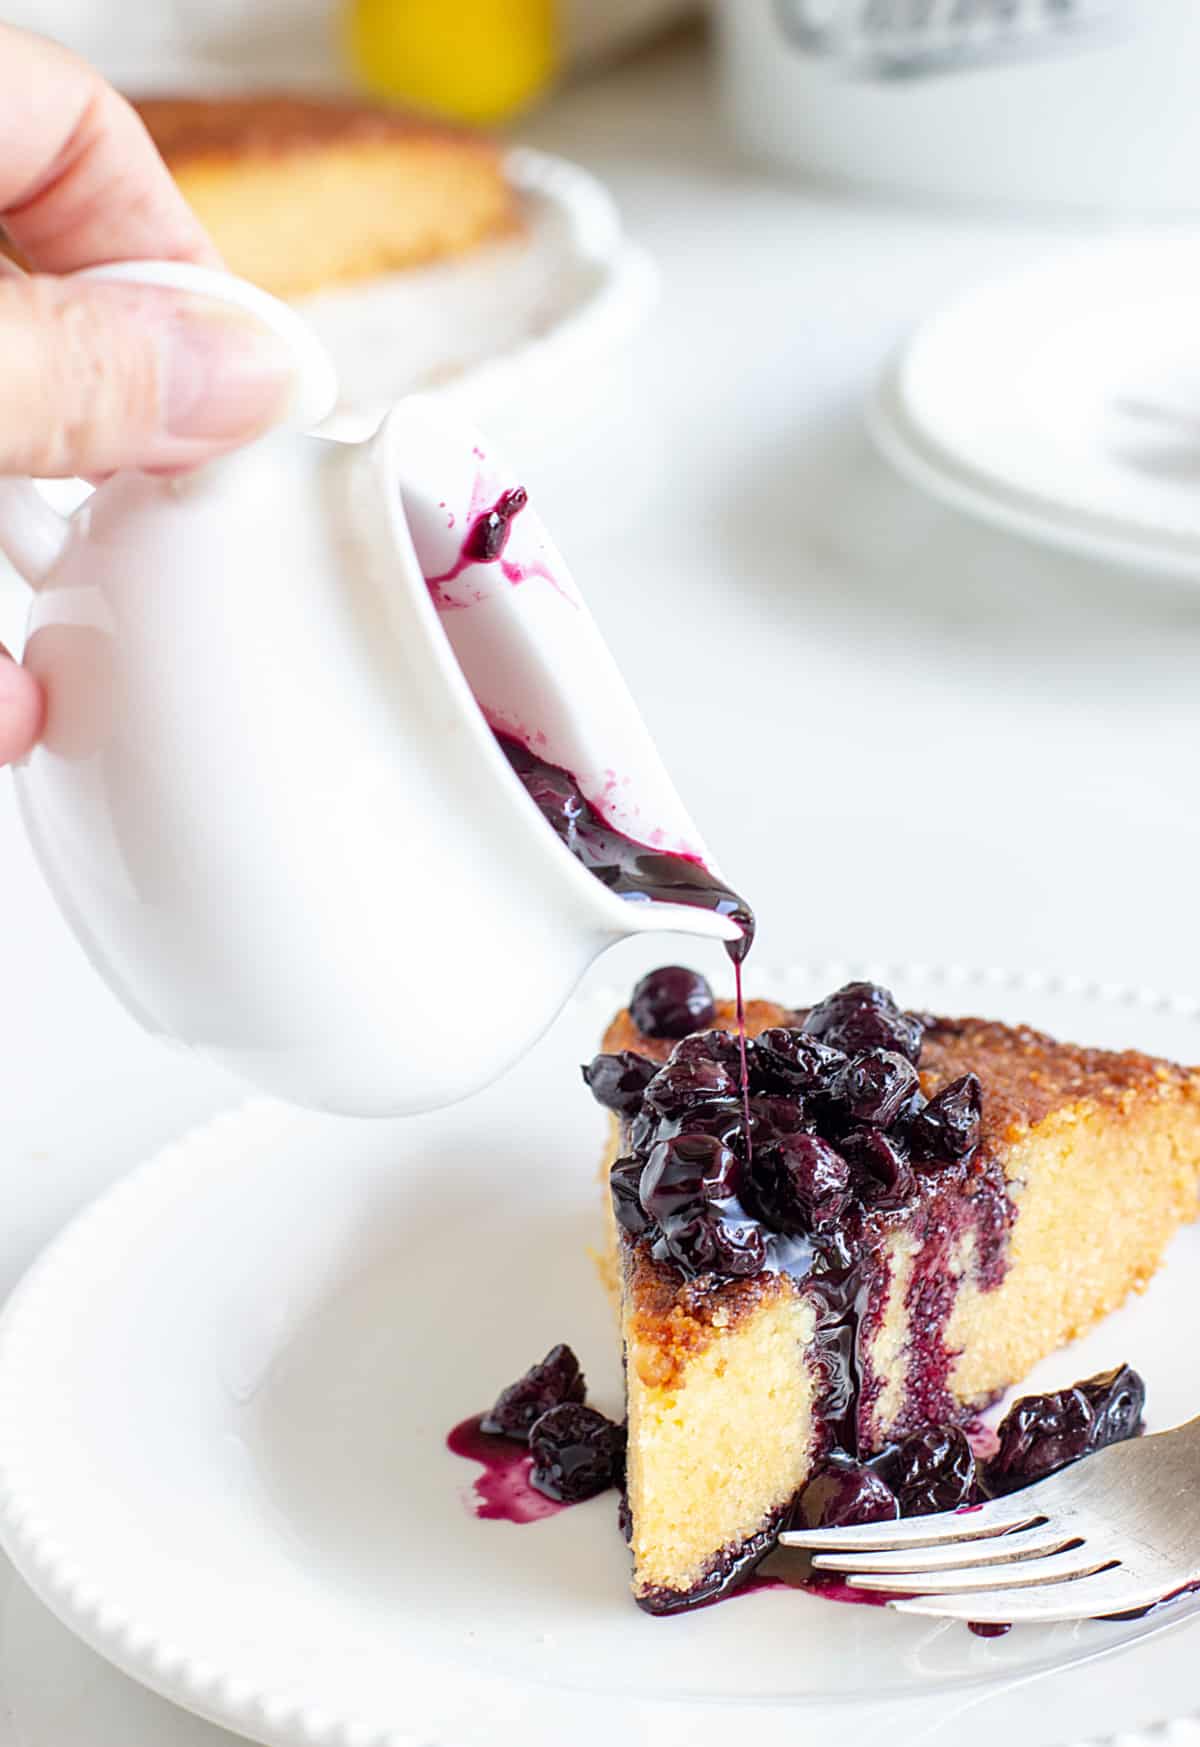 Pouring blueberry sauce on slice of yellow cake from white saucer, white plate